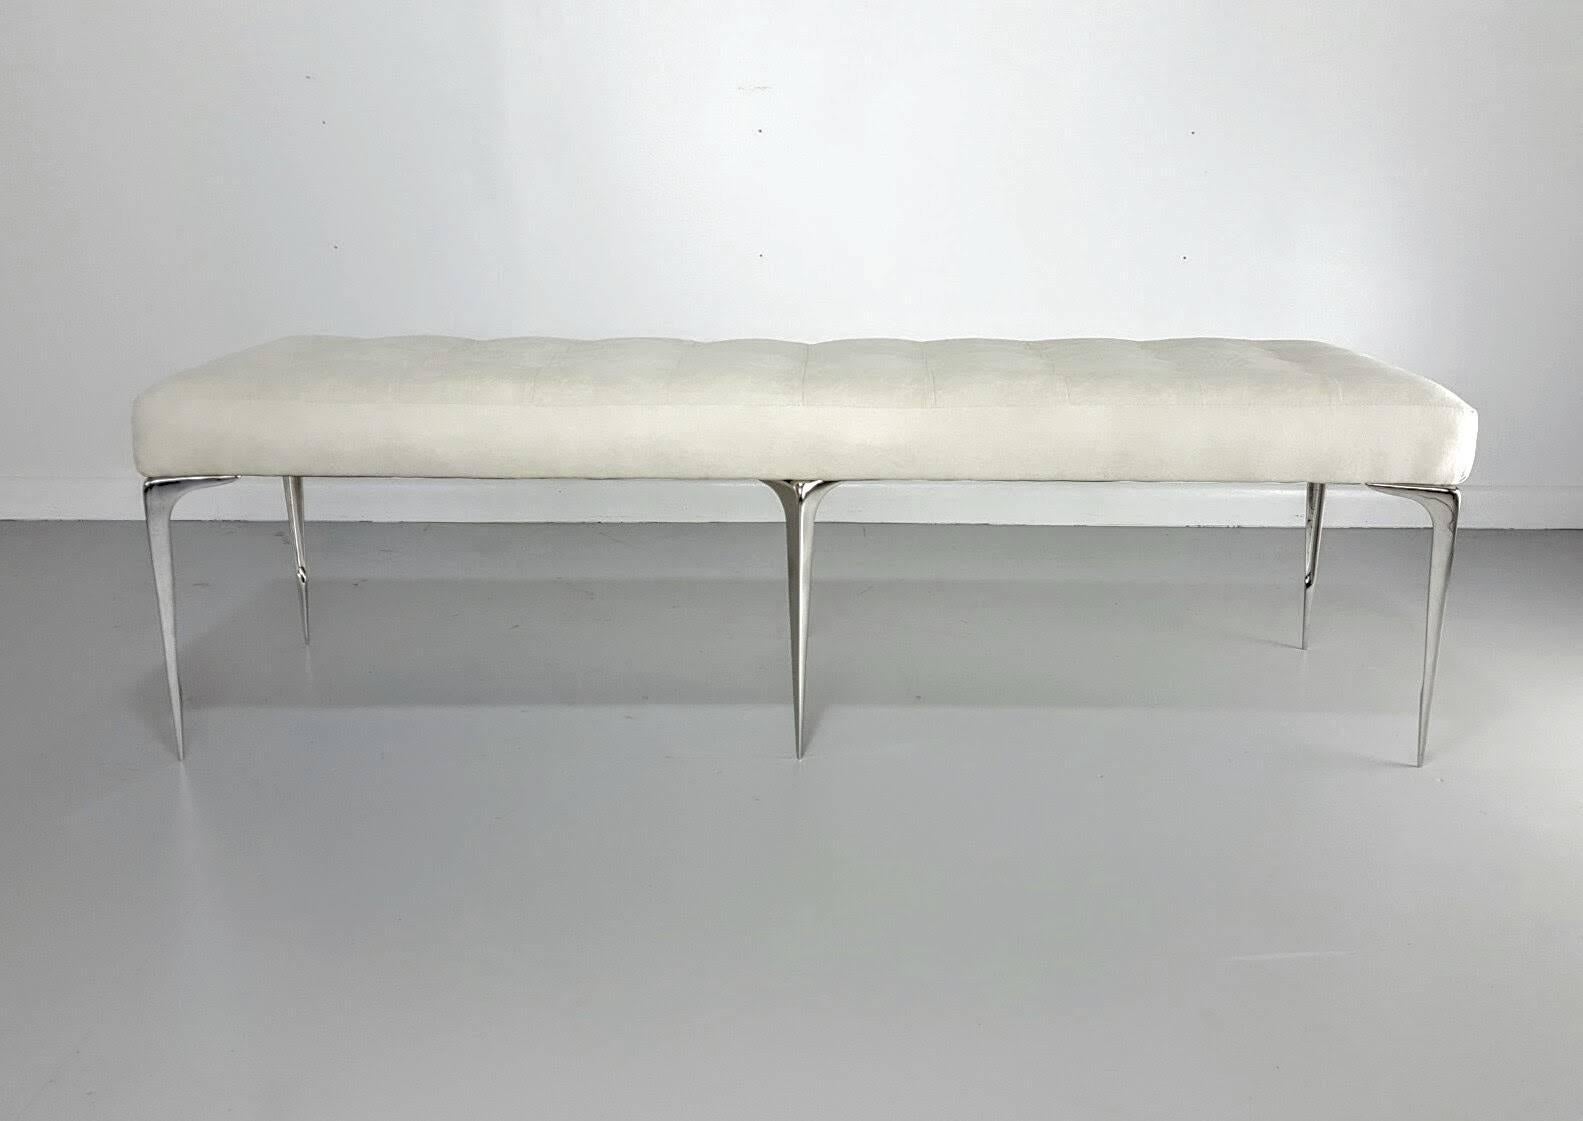 Our Lancia Espansa bench with tapered legs in polished nickel. The leg is an exact preproduction of a 1950s Italian design. Custom sizes, fabrics, metal finishes and patinas are available. 
